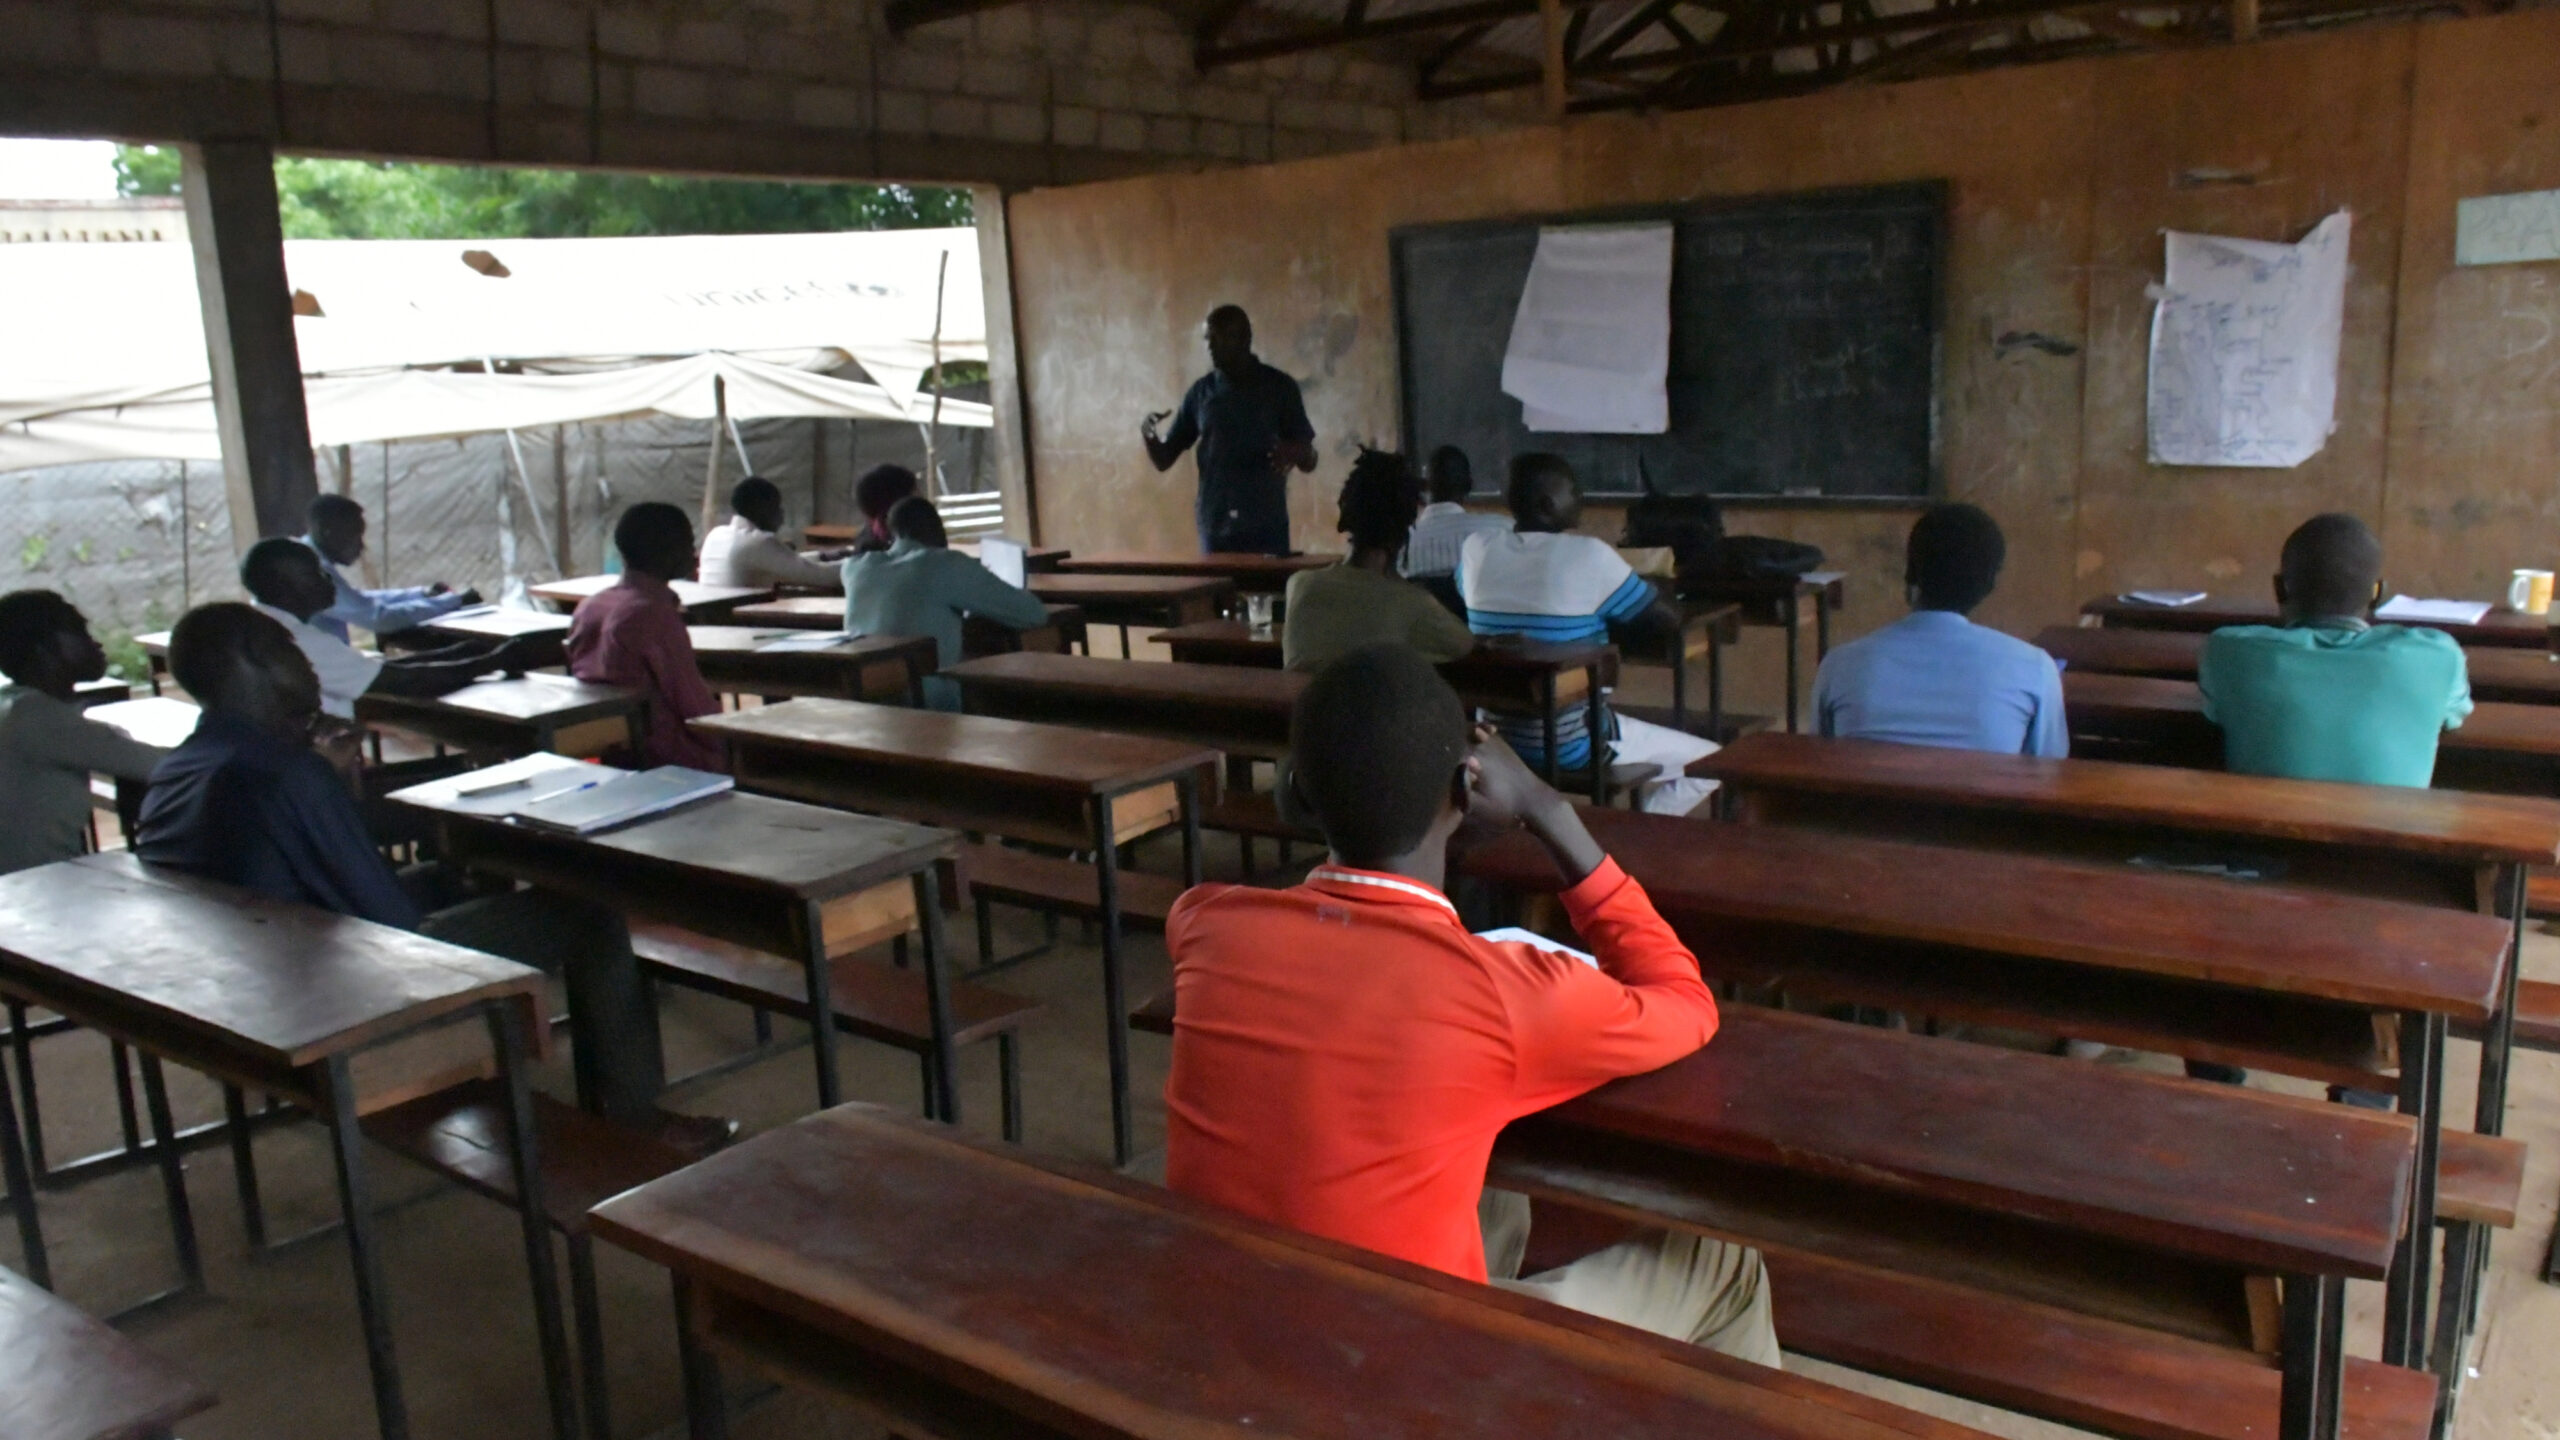 teacher training in maban, south sudan. mean attend training class